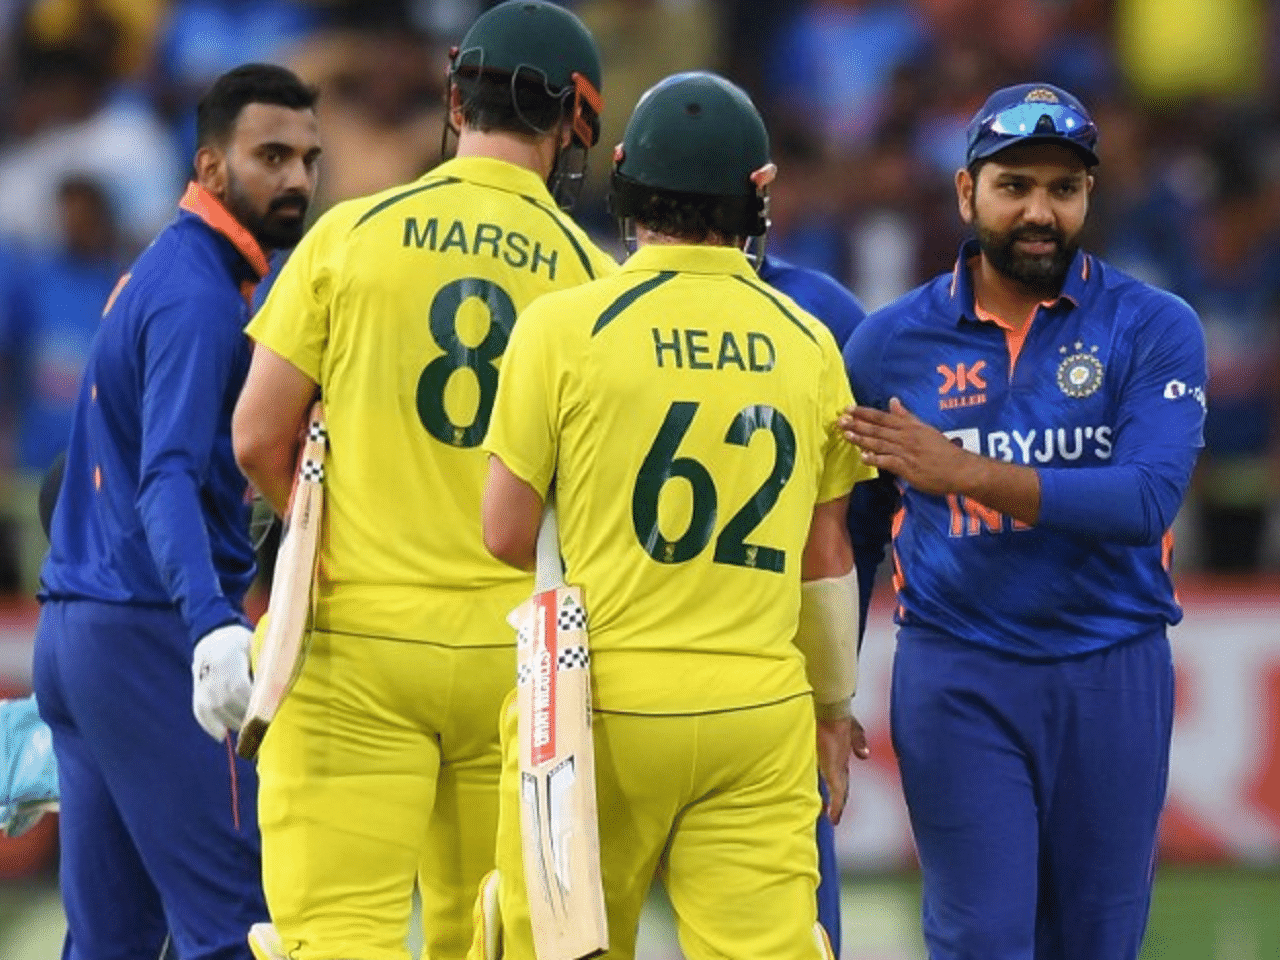 Australia 450/2, India 65 all out in the final: Mitchell Marsh’s outrageous prediction for 2023 ODI World Cup